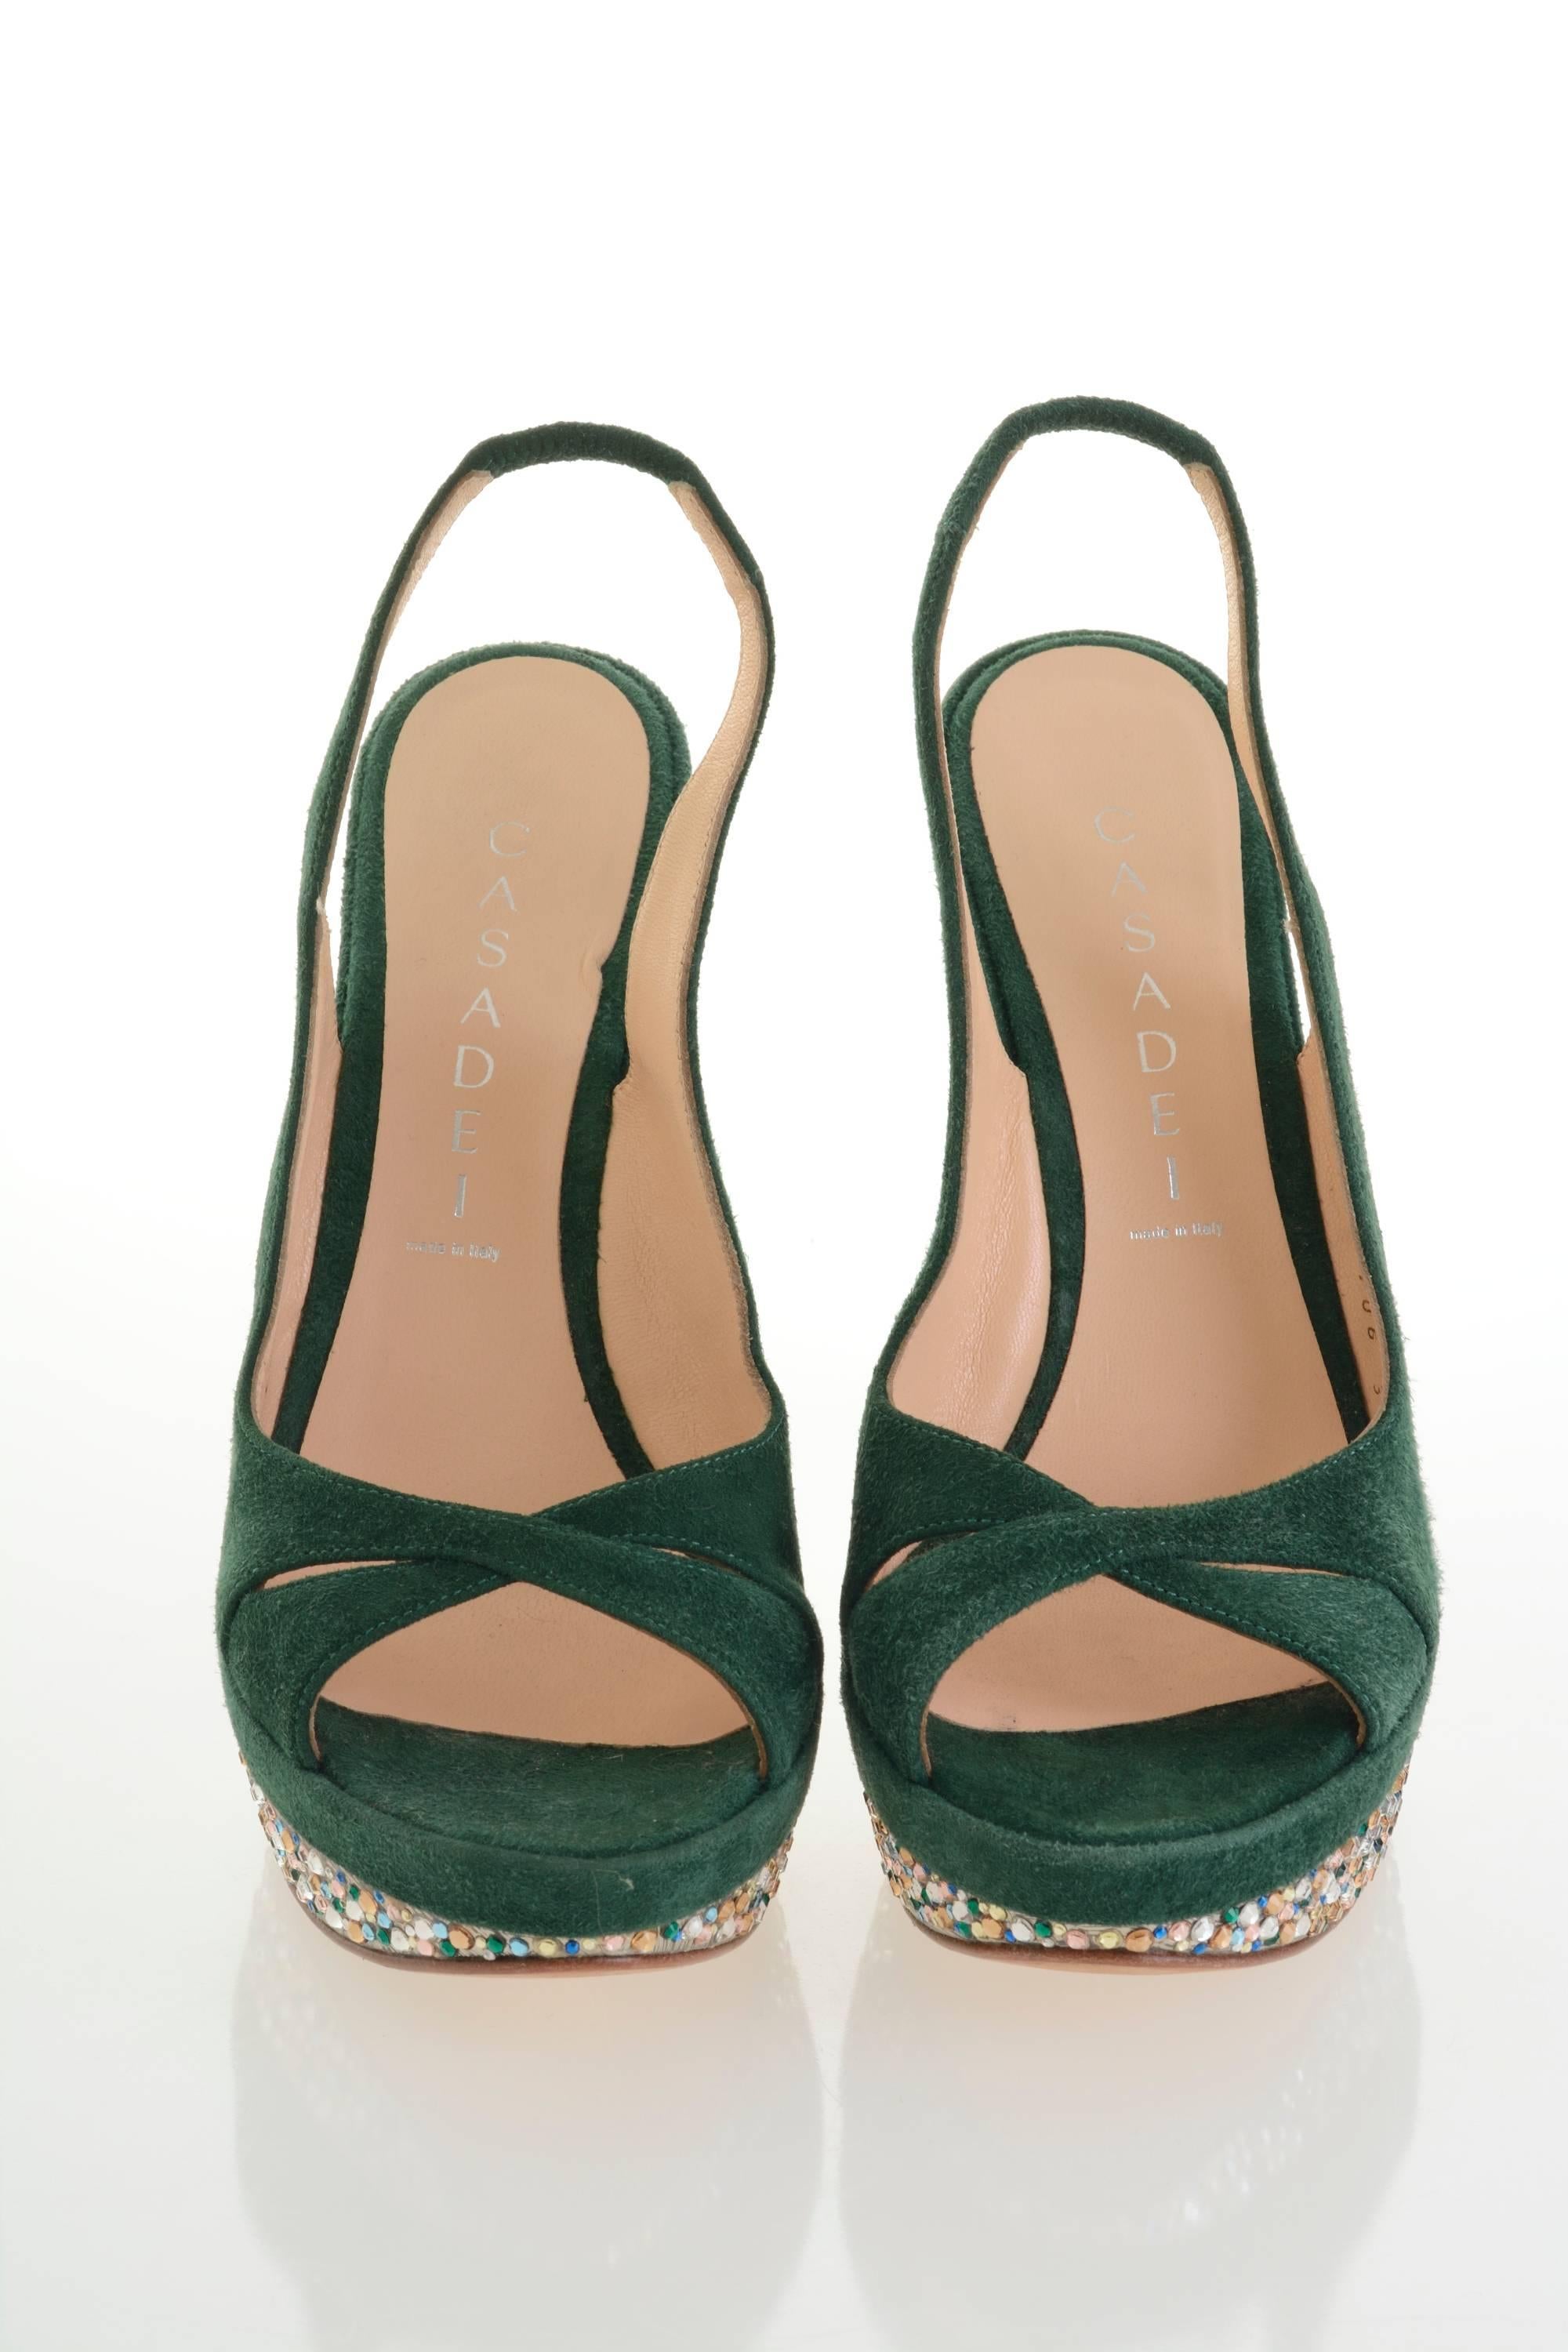 These feminine and authentic Casadei sandals are in green suede leather with Swarovski multi-tone crystals on the platforms and heels.  


Measurement:
Label size 37 Italian 
Insole 9,25 inch
Heel height 5,50 inch
Platform 1,50 inch